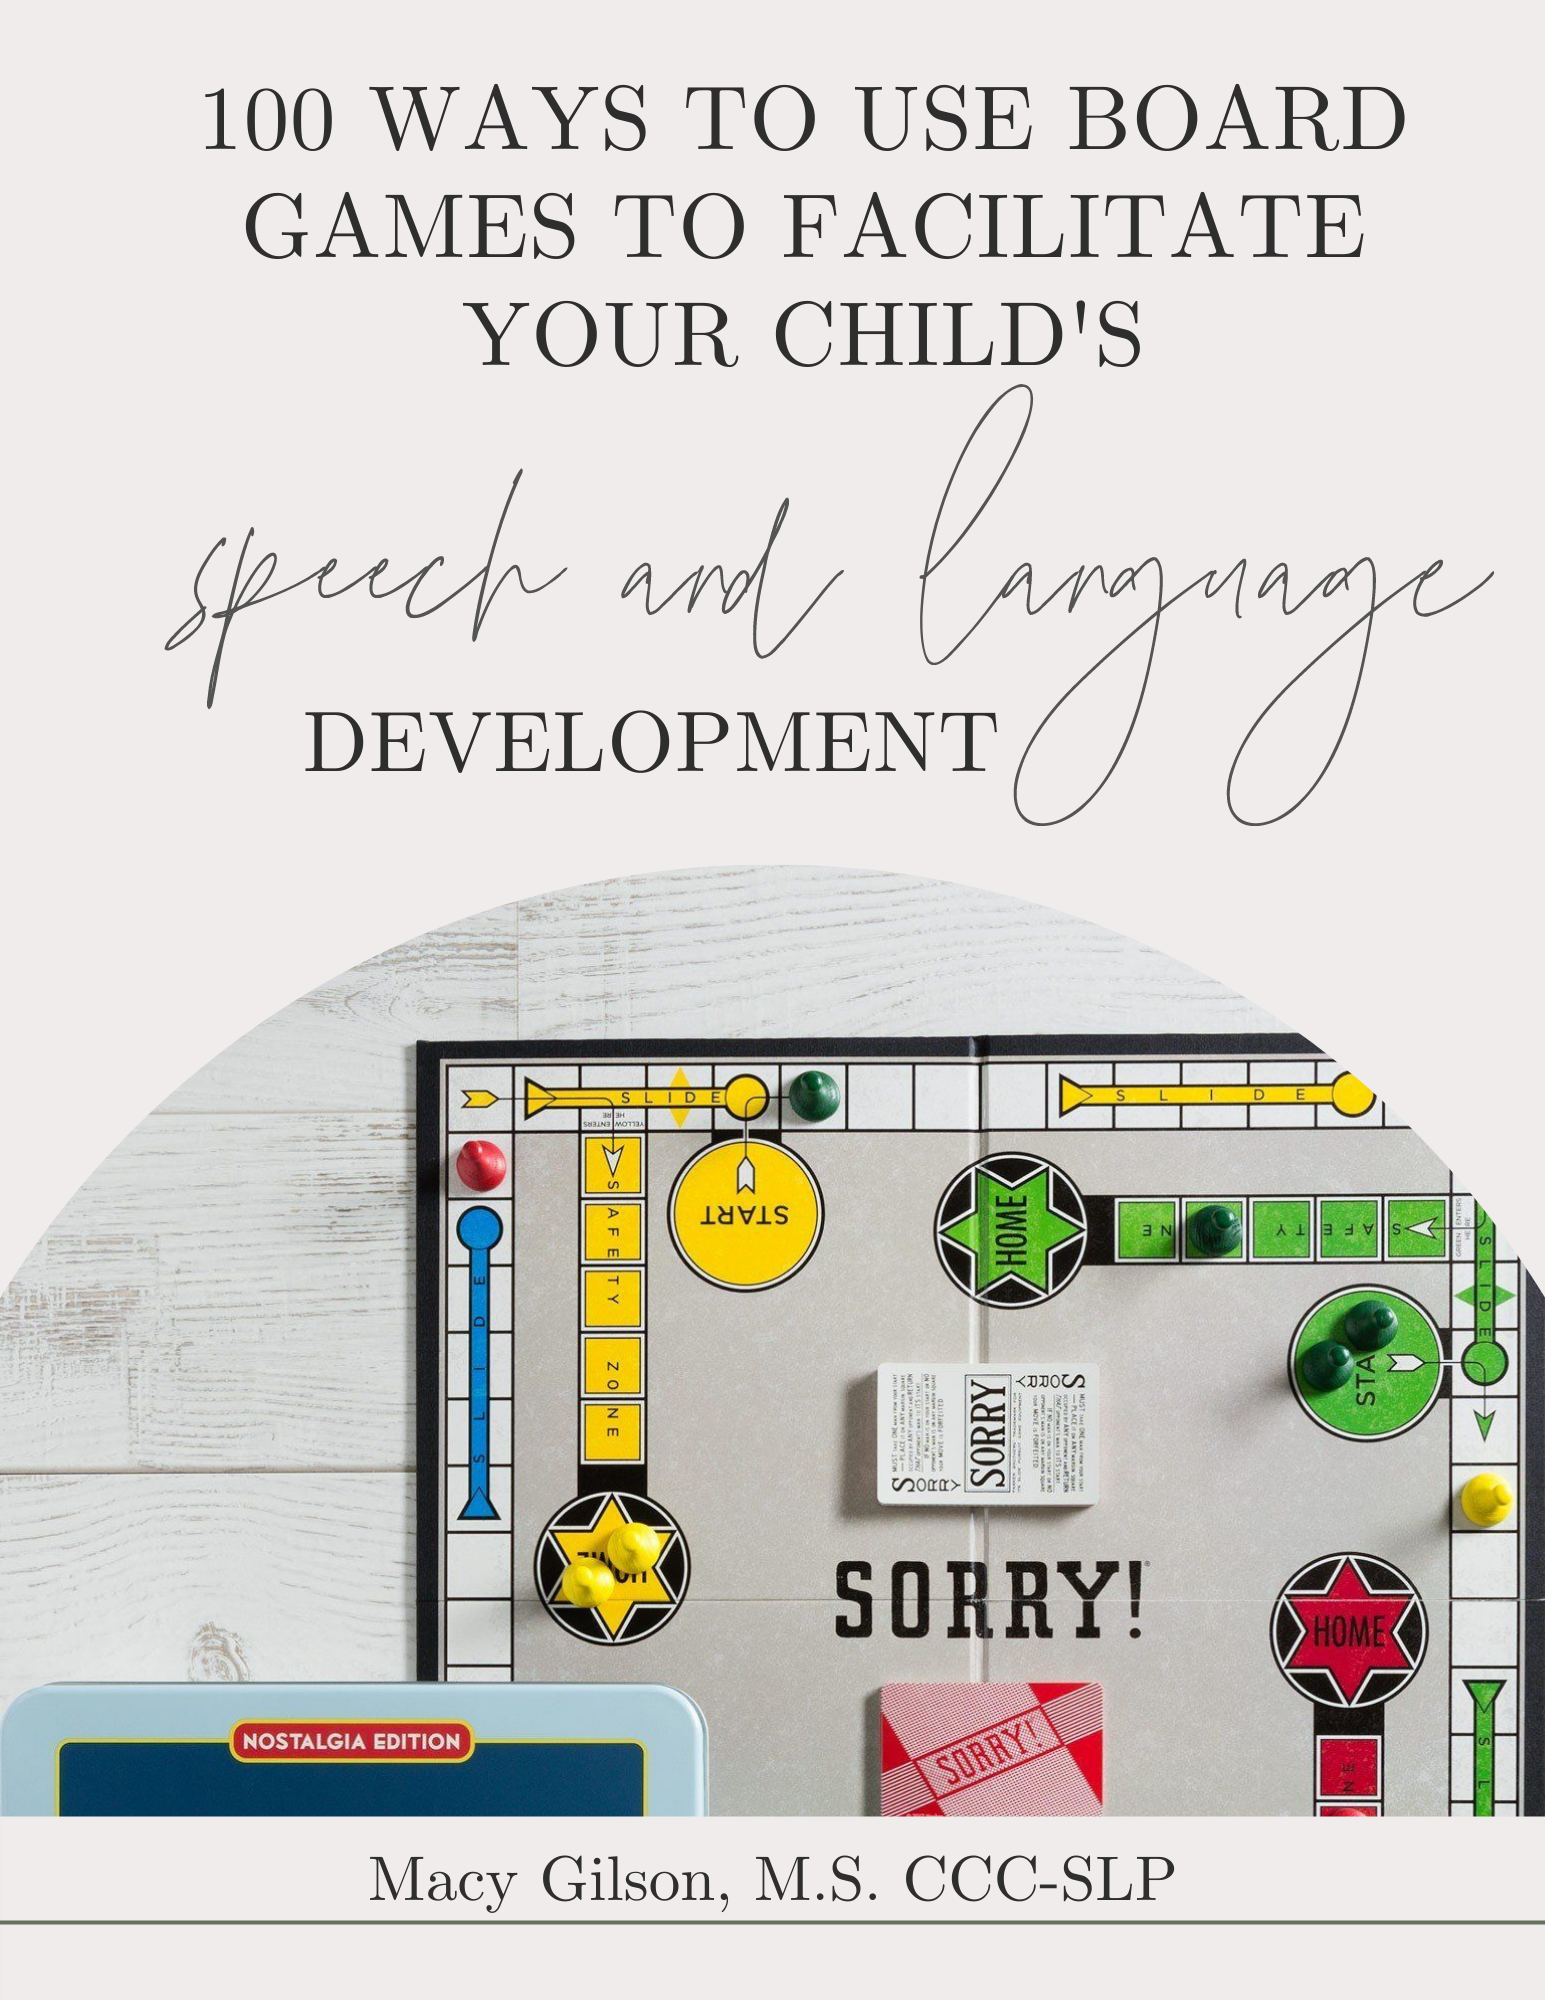 100 Ways to Use Board Games to Facilitate Speech and Language Development